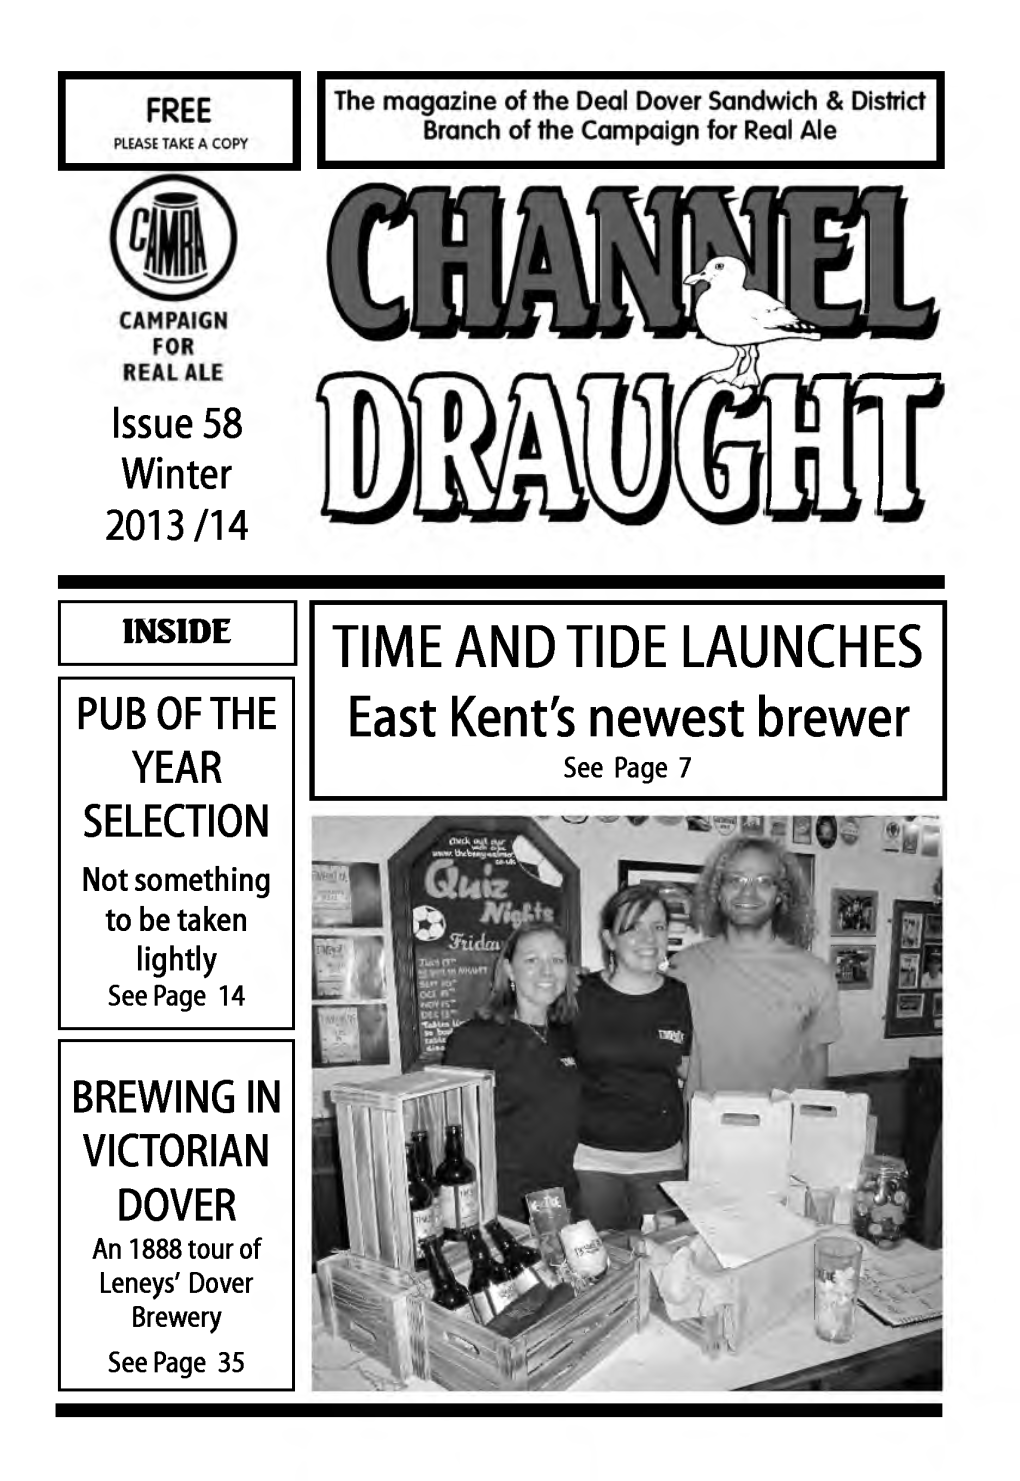 TIME and TIDE LAUNCHES East Kent's Newest Brewer